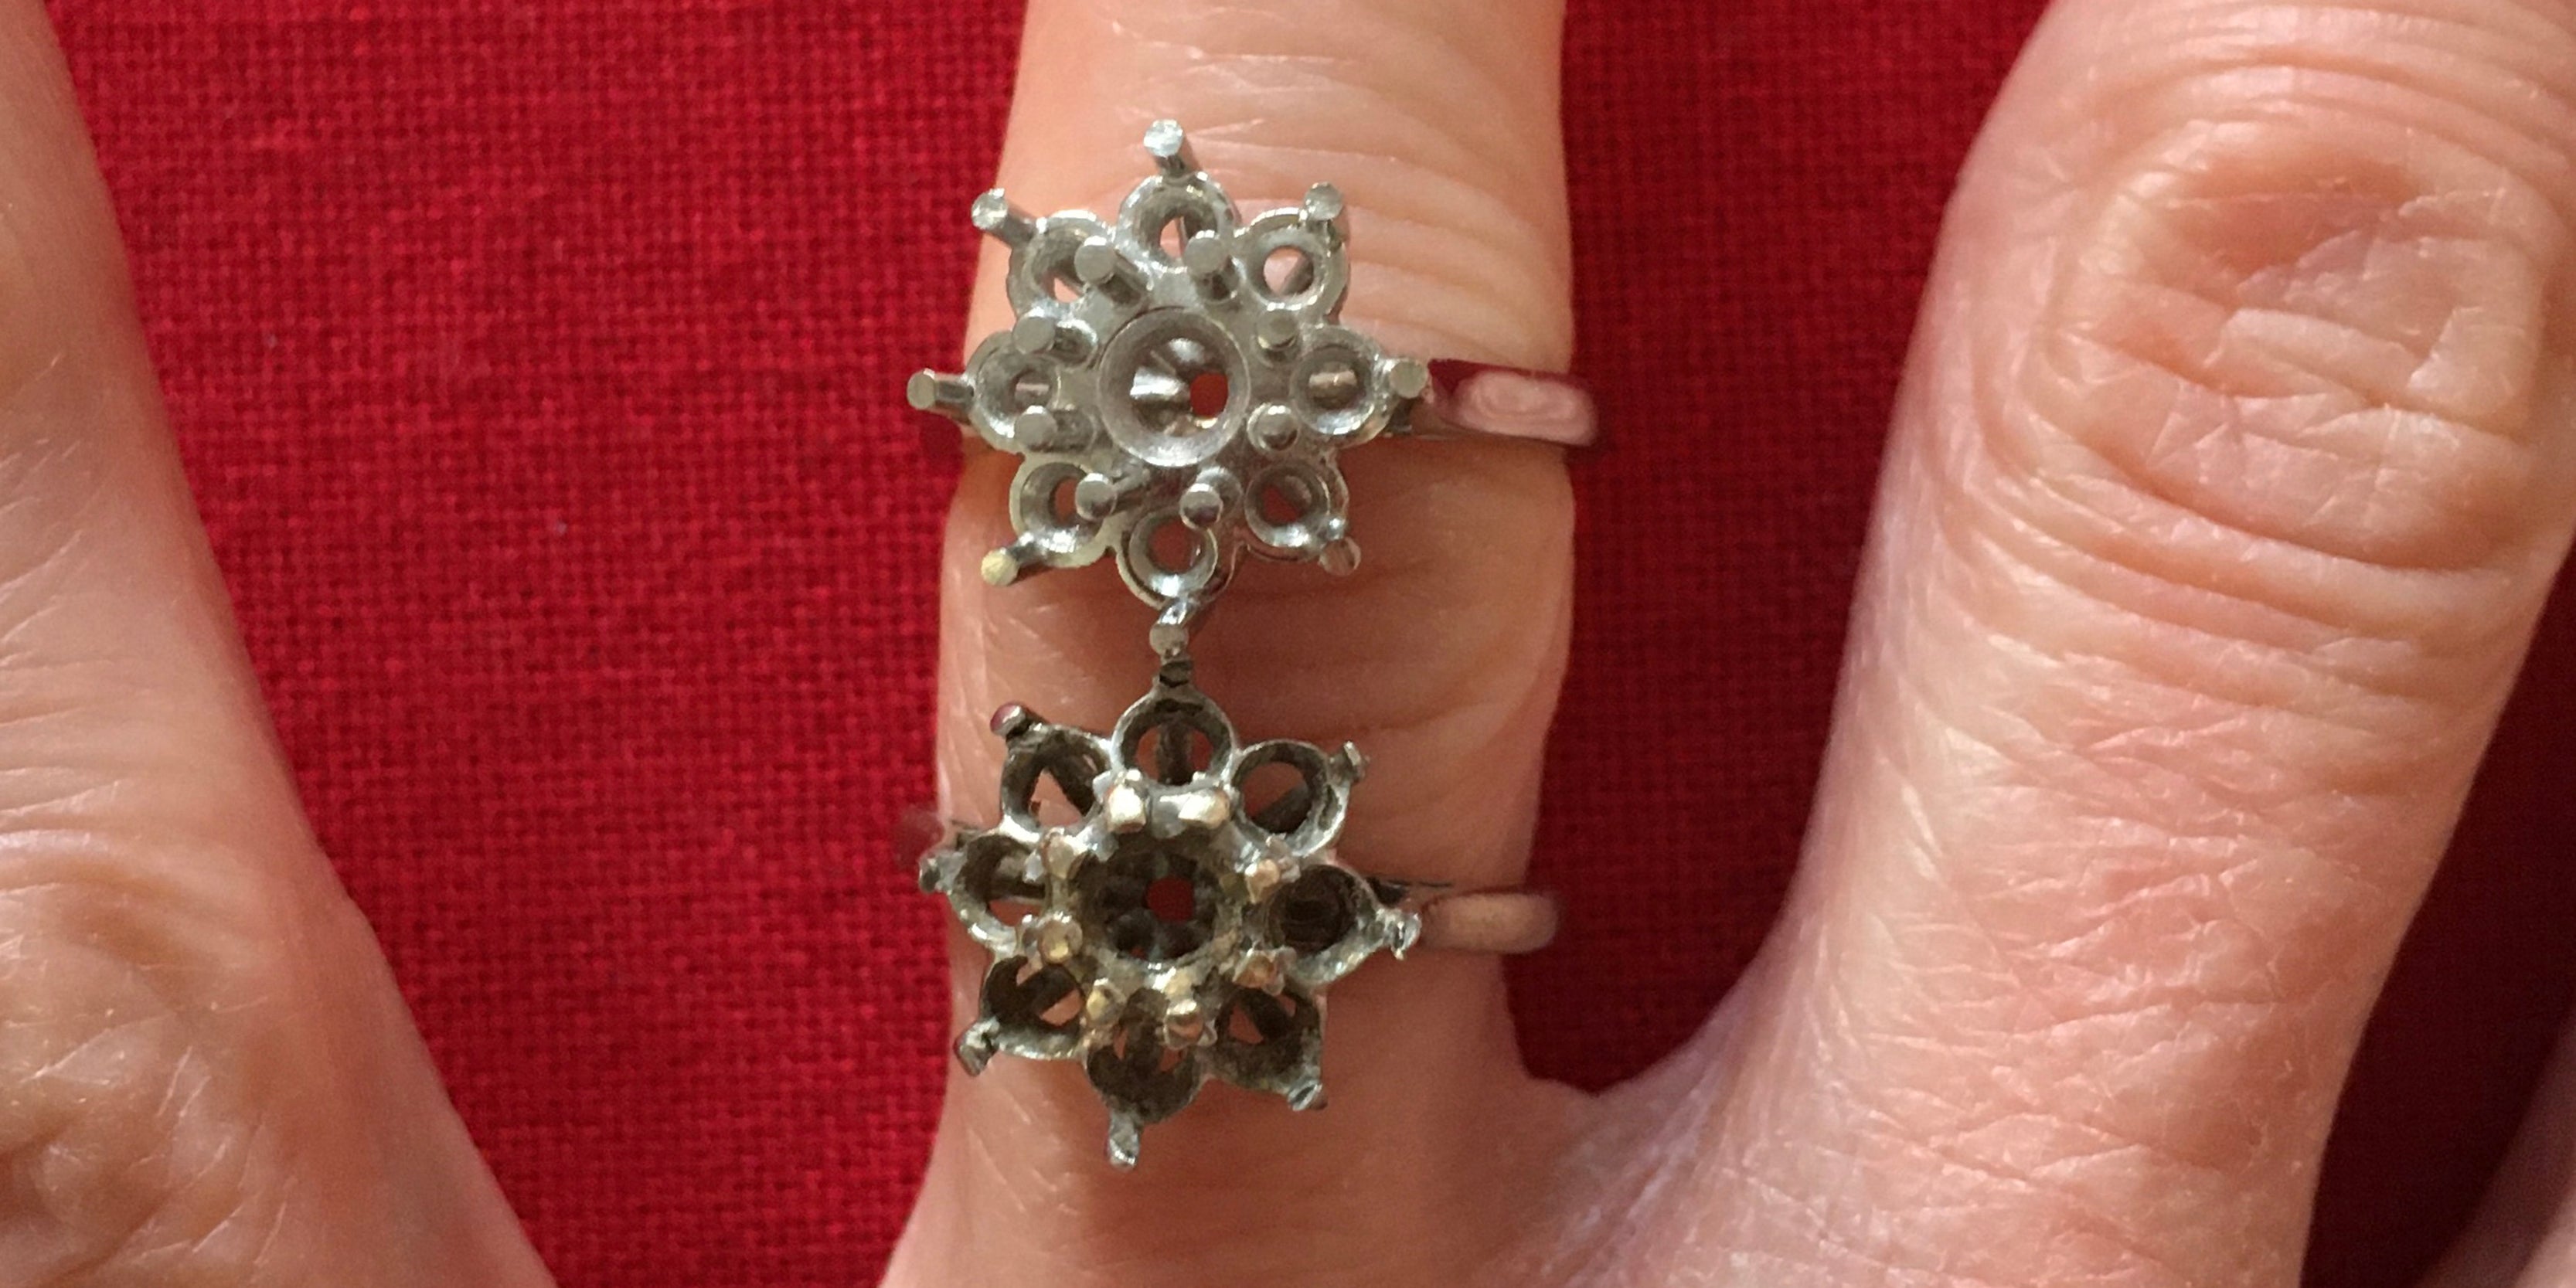 Handmade bespoke platinum cluster ring compared to old one by Amanda Mansell